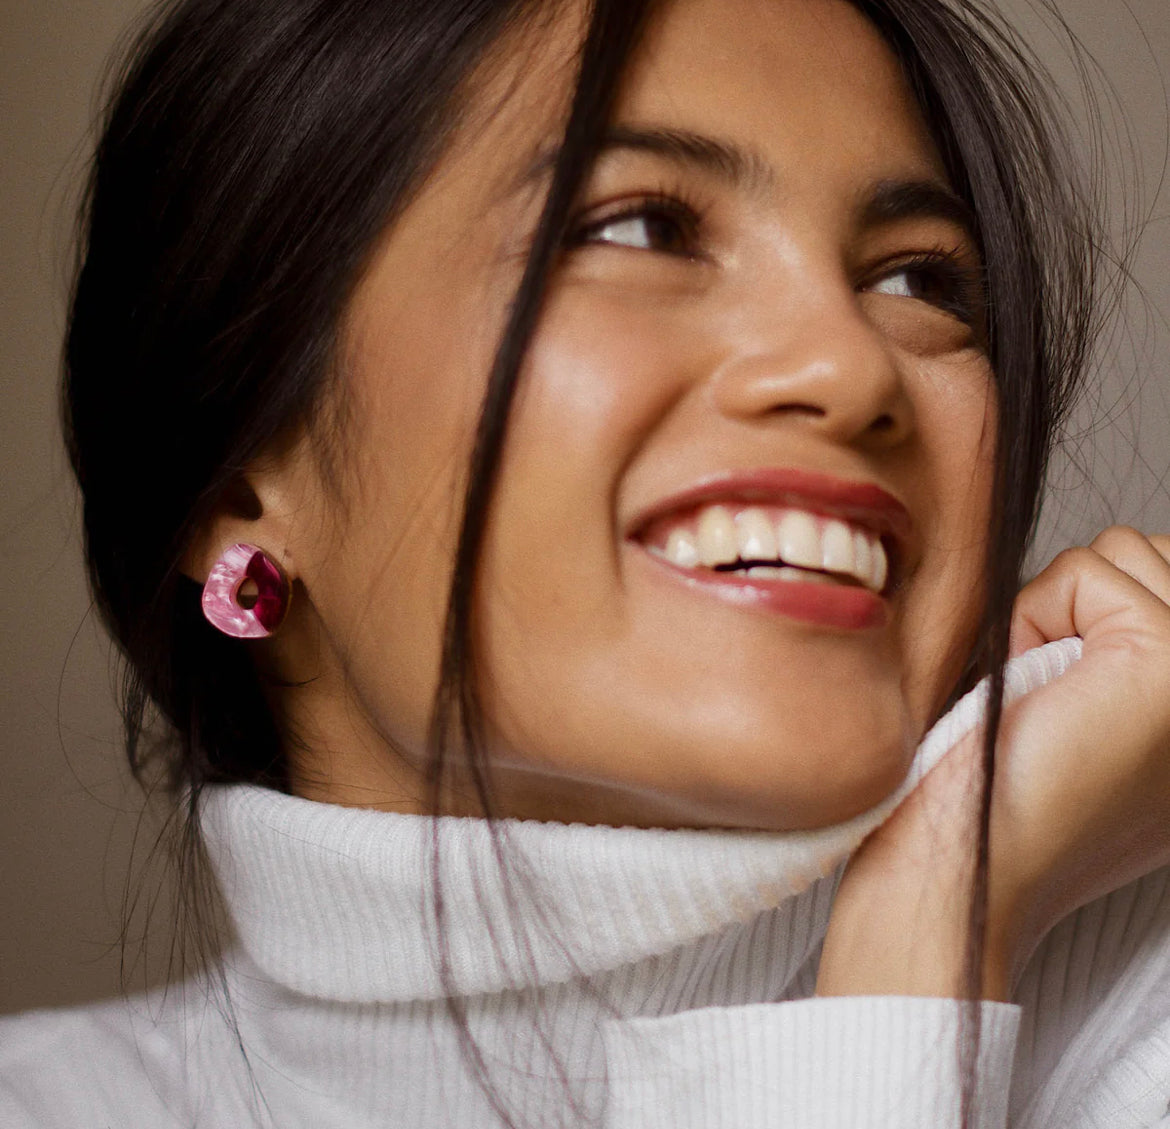 'Oh' Stud Earrings in Berry & Pink - THE BRISTOL ARTISAN